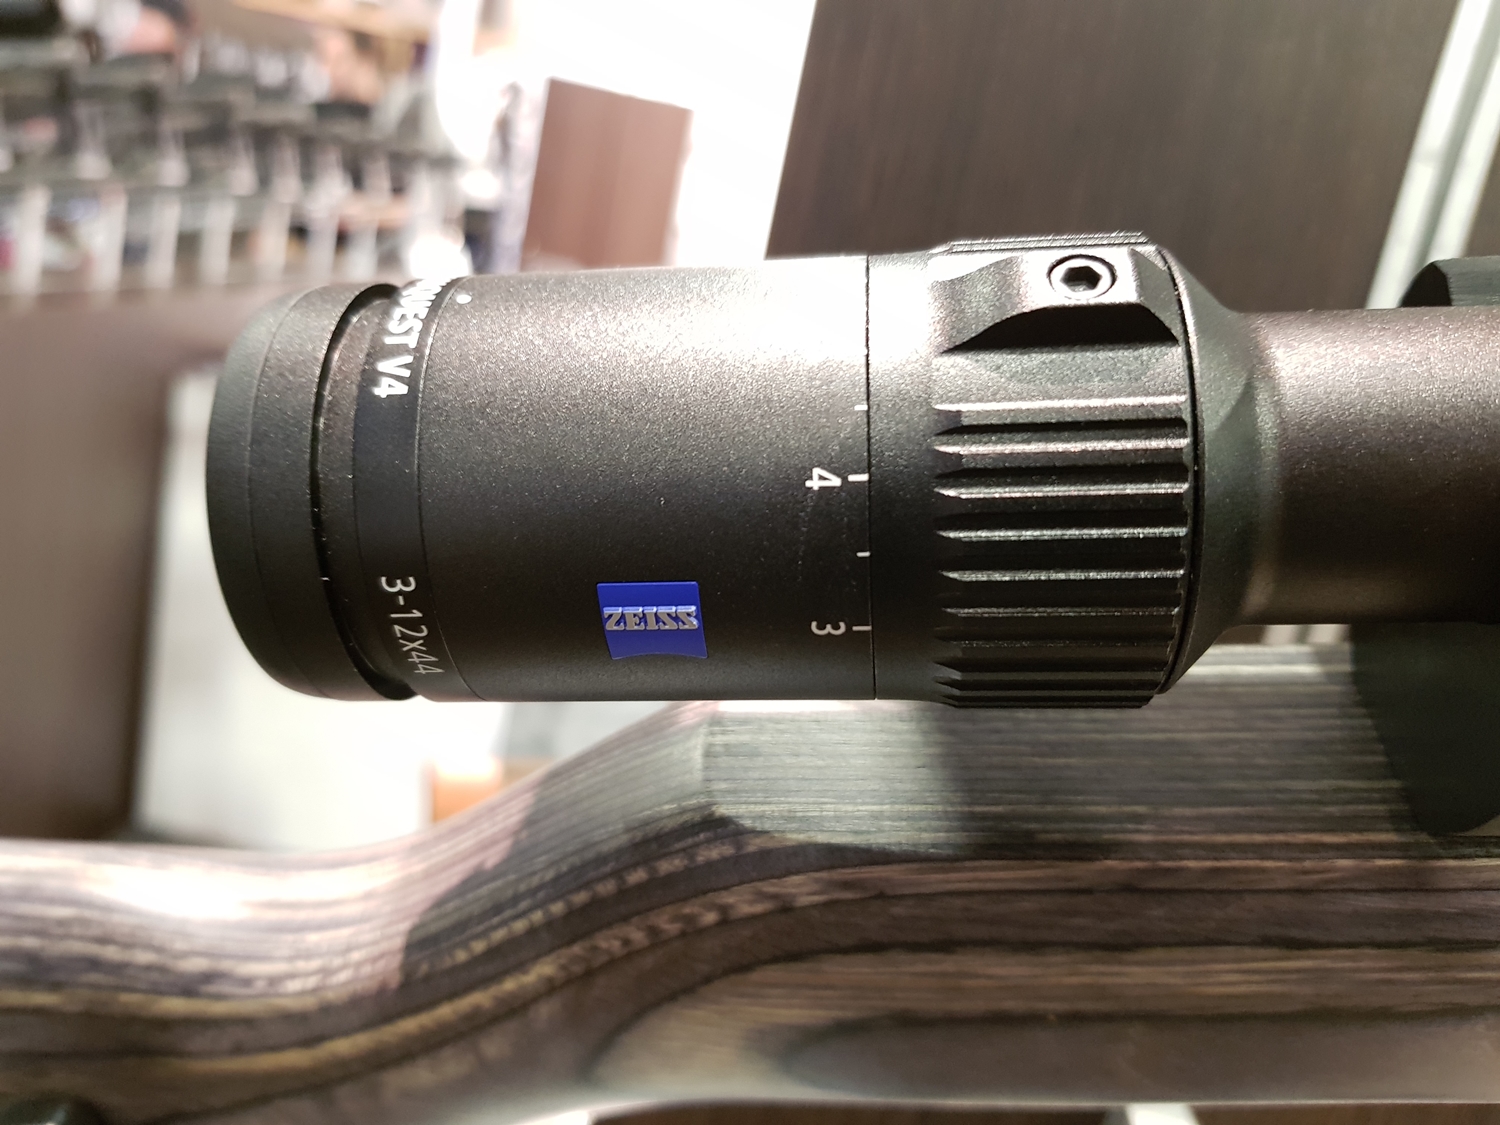 Zeiss Conquest V4 3-12x44